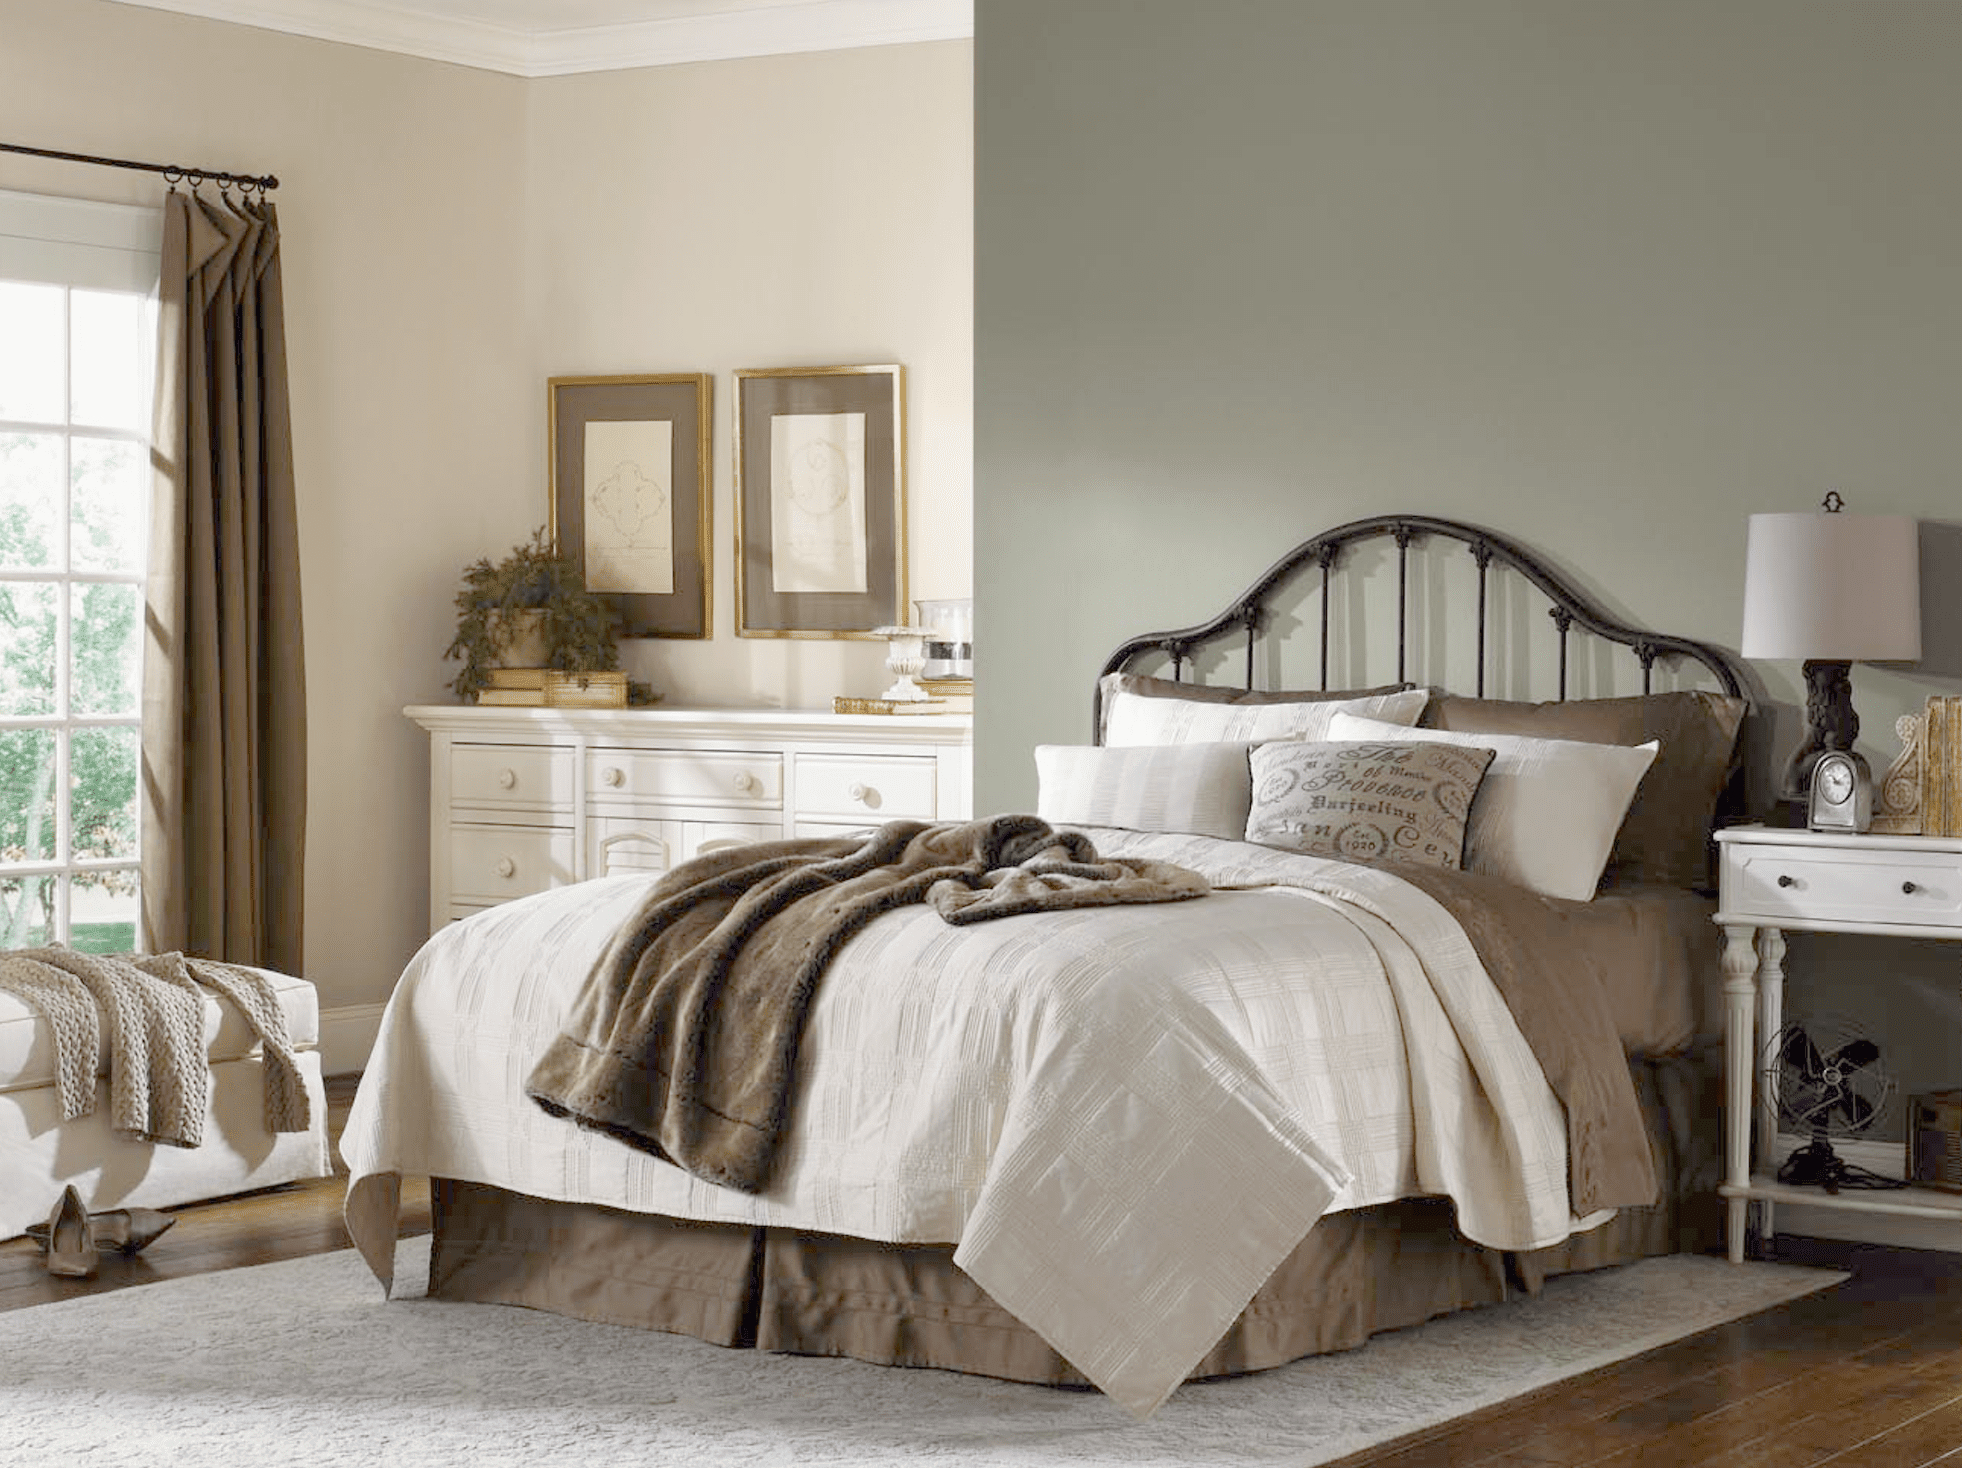 8 Relaxing Sherwin Williams Paint Colors For Bedrooms in sizing 1962 X 1468